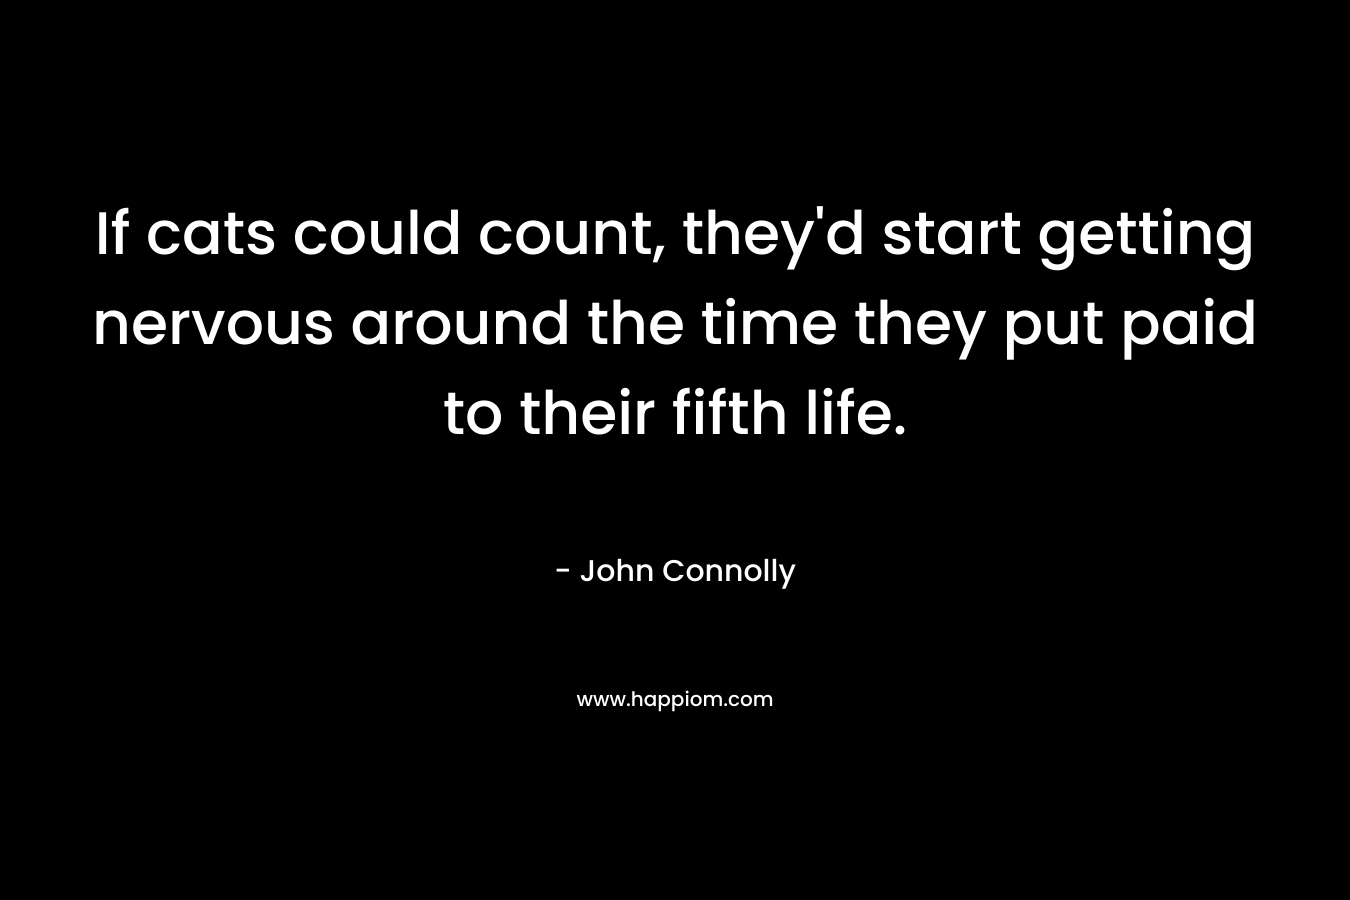 If cats could count, they’d start getting nervous around the time they put paid to their fifth life. – John Connolly